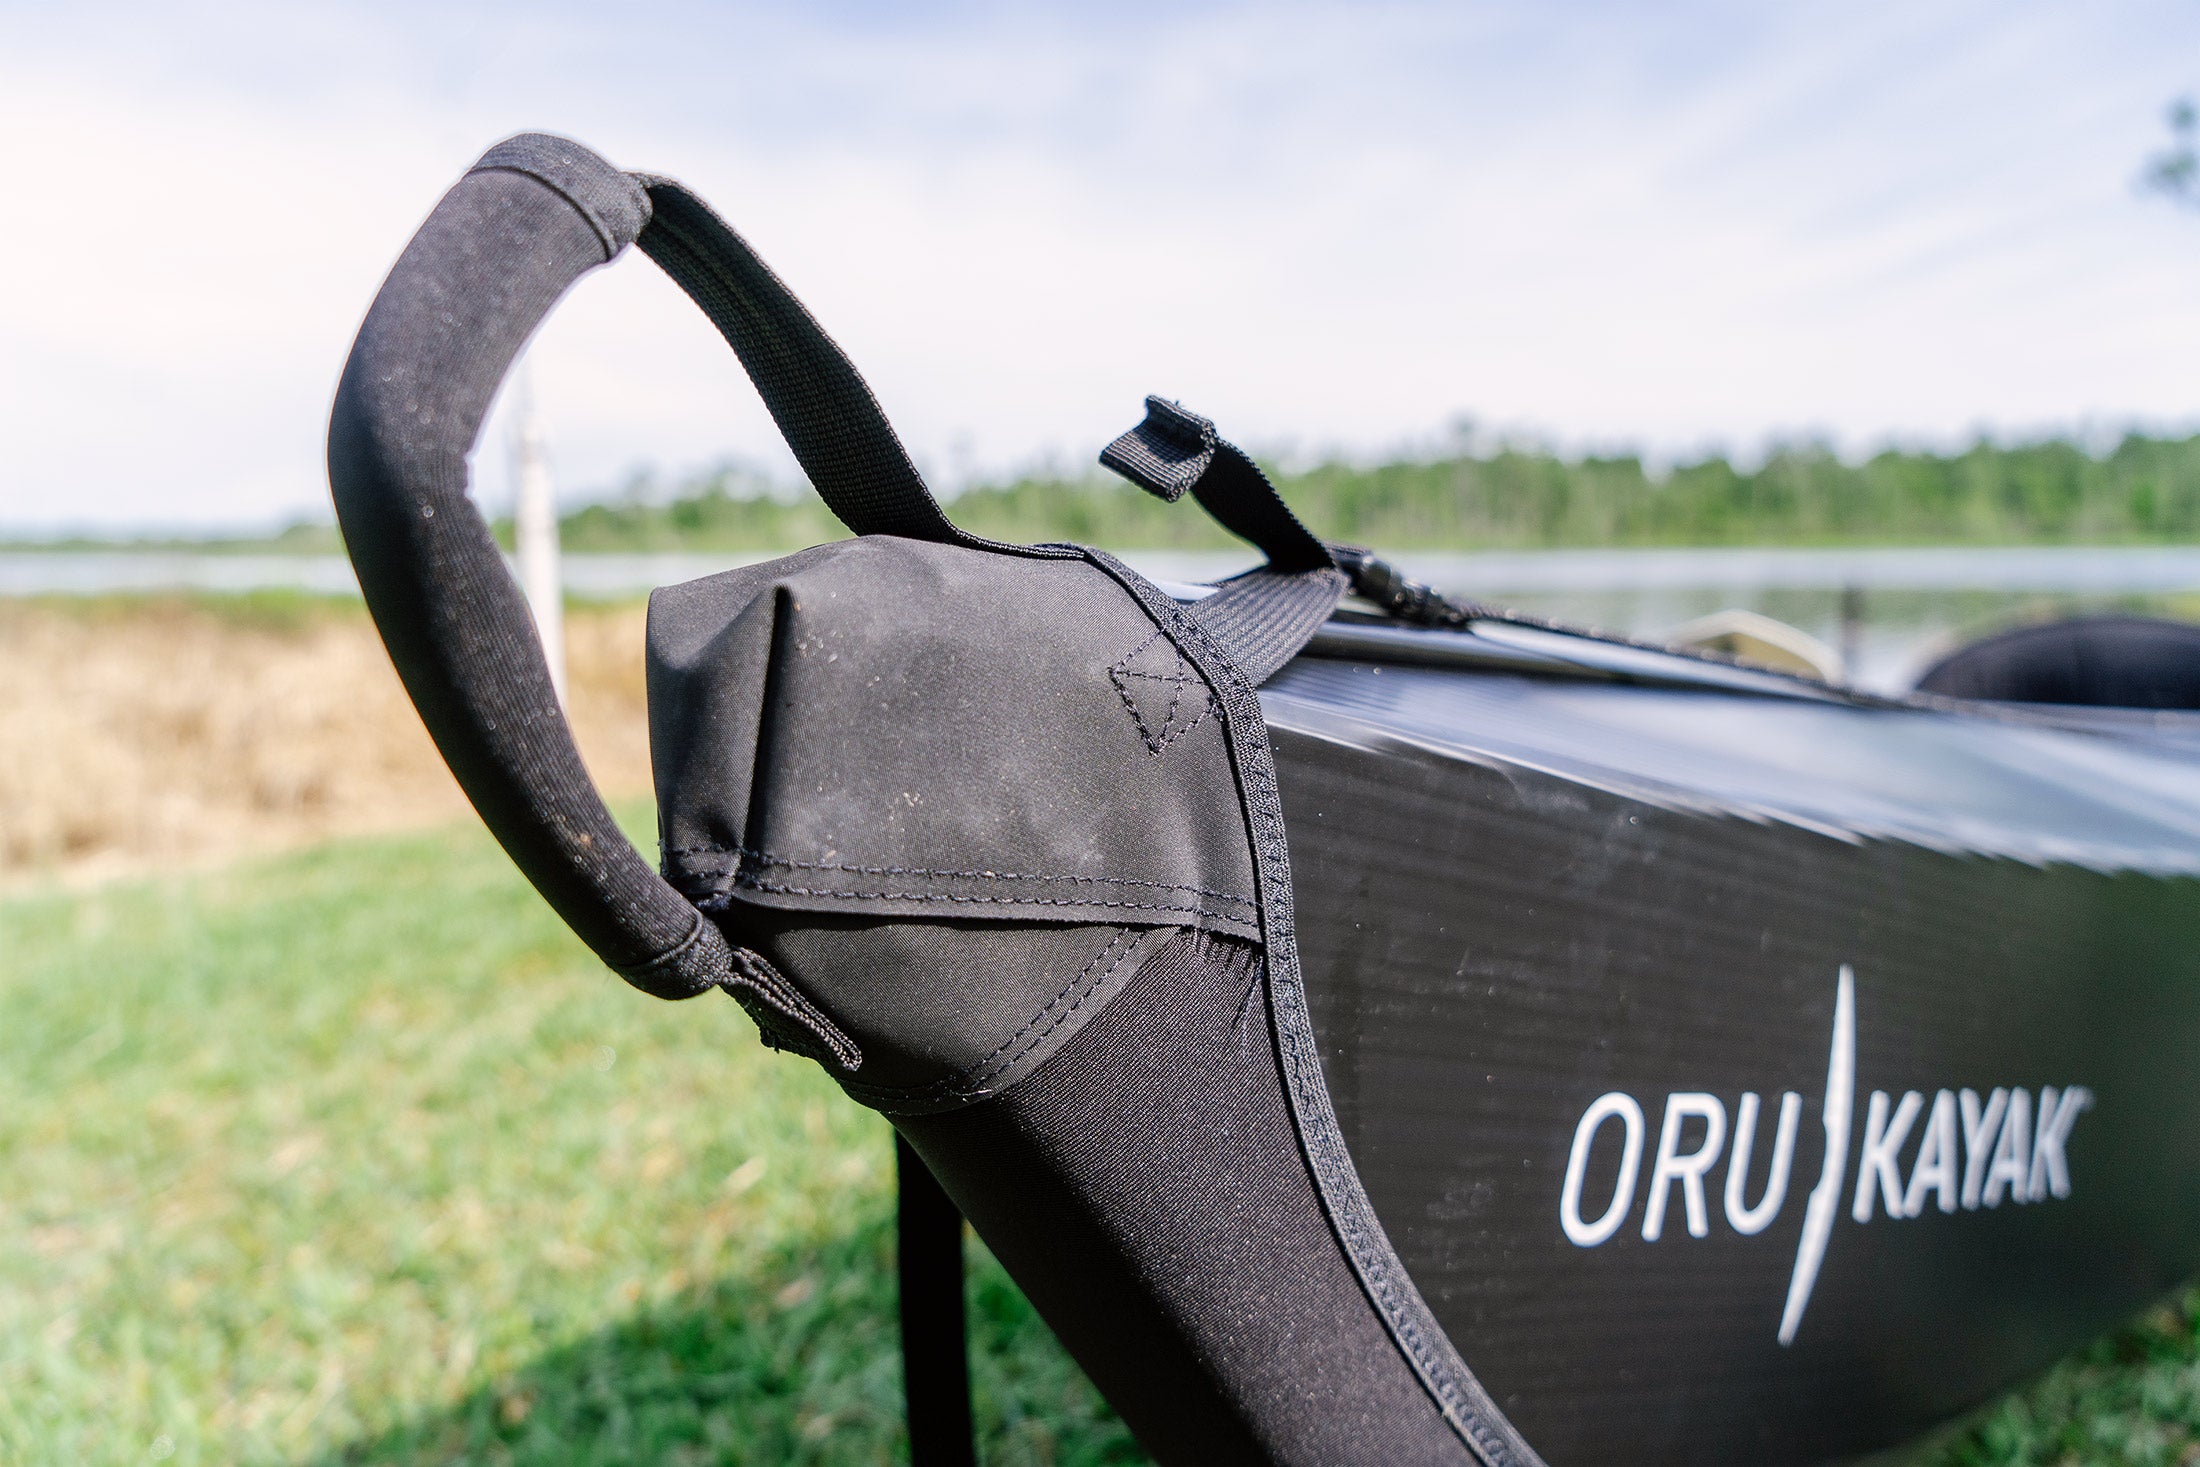 The fairings and front handle of the Oru Kayak